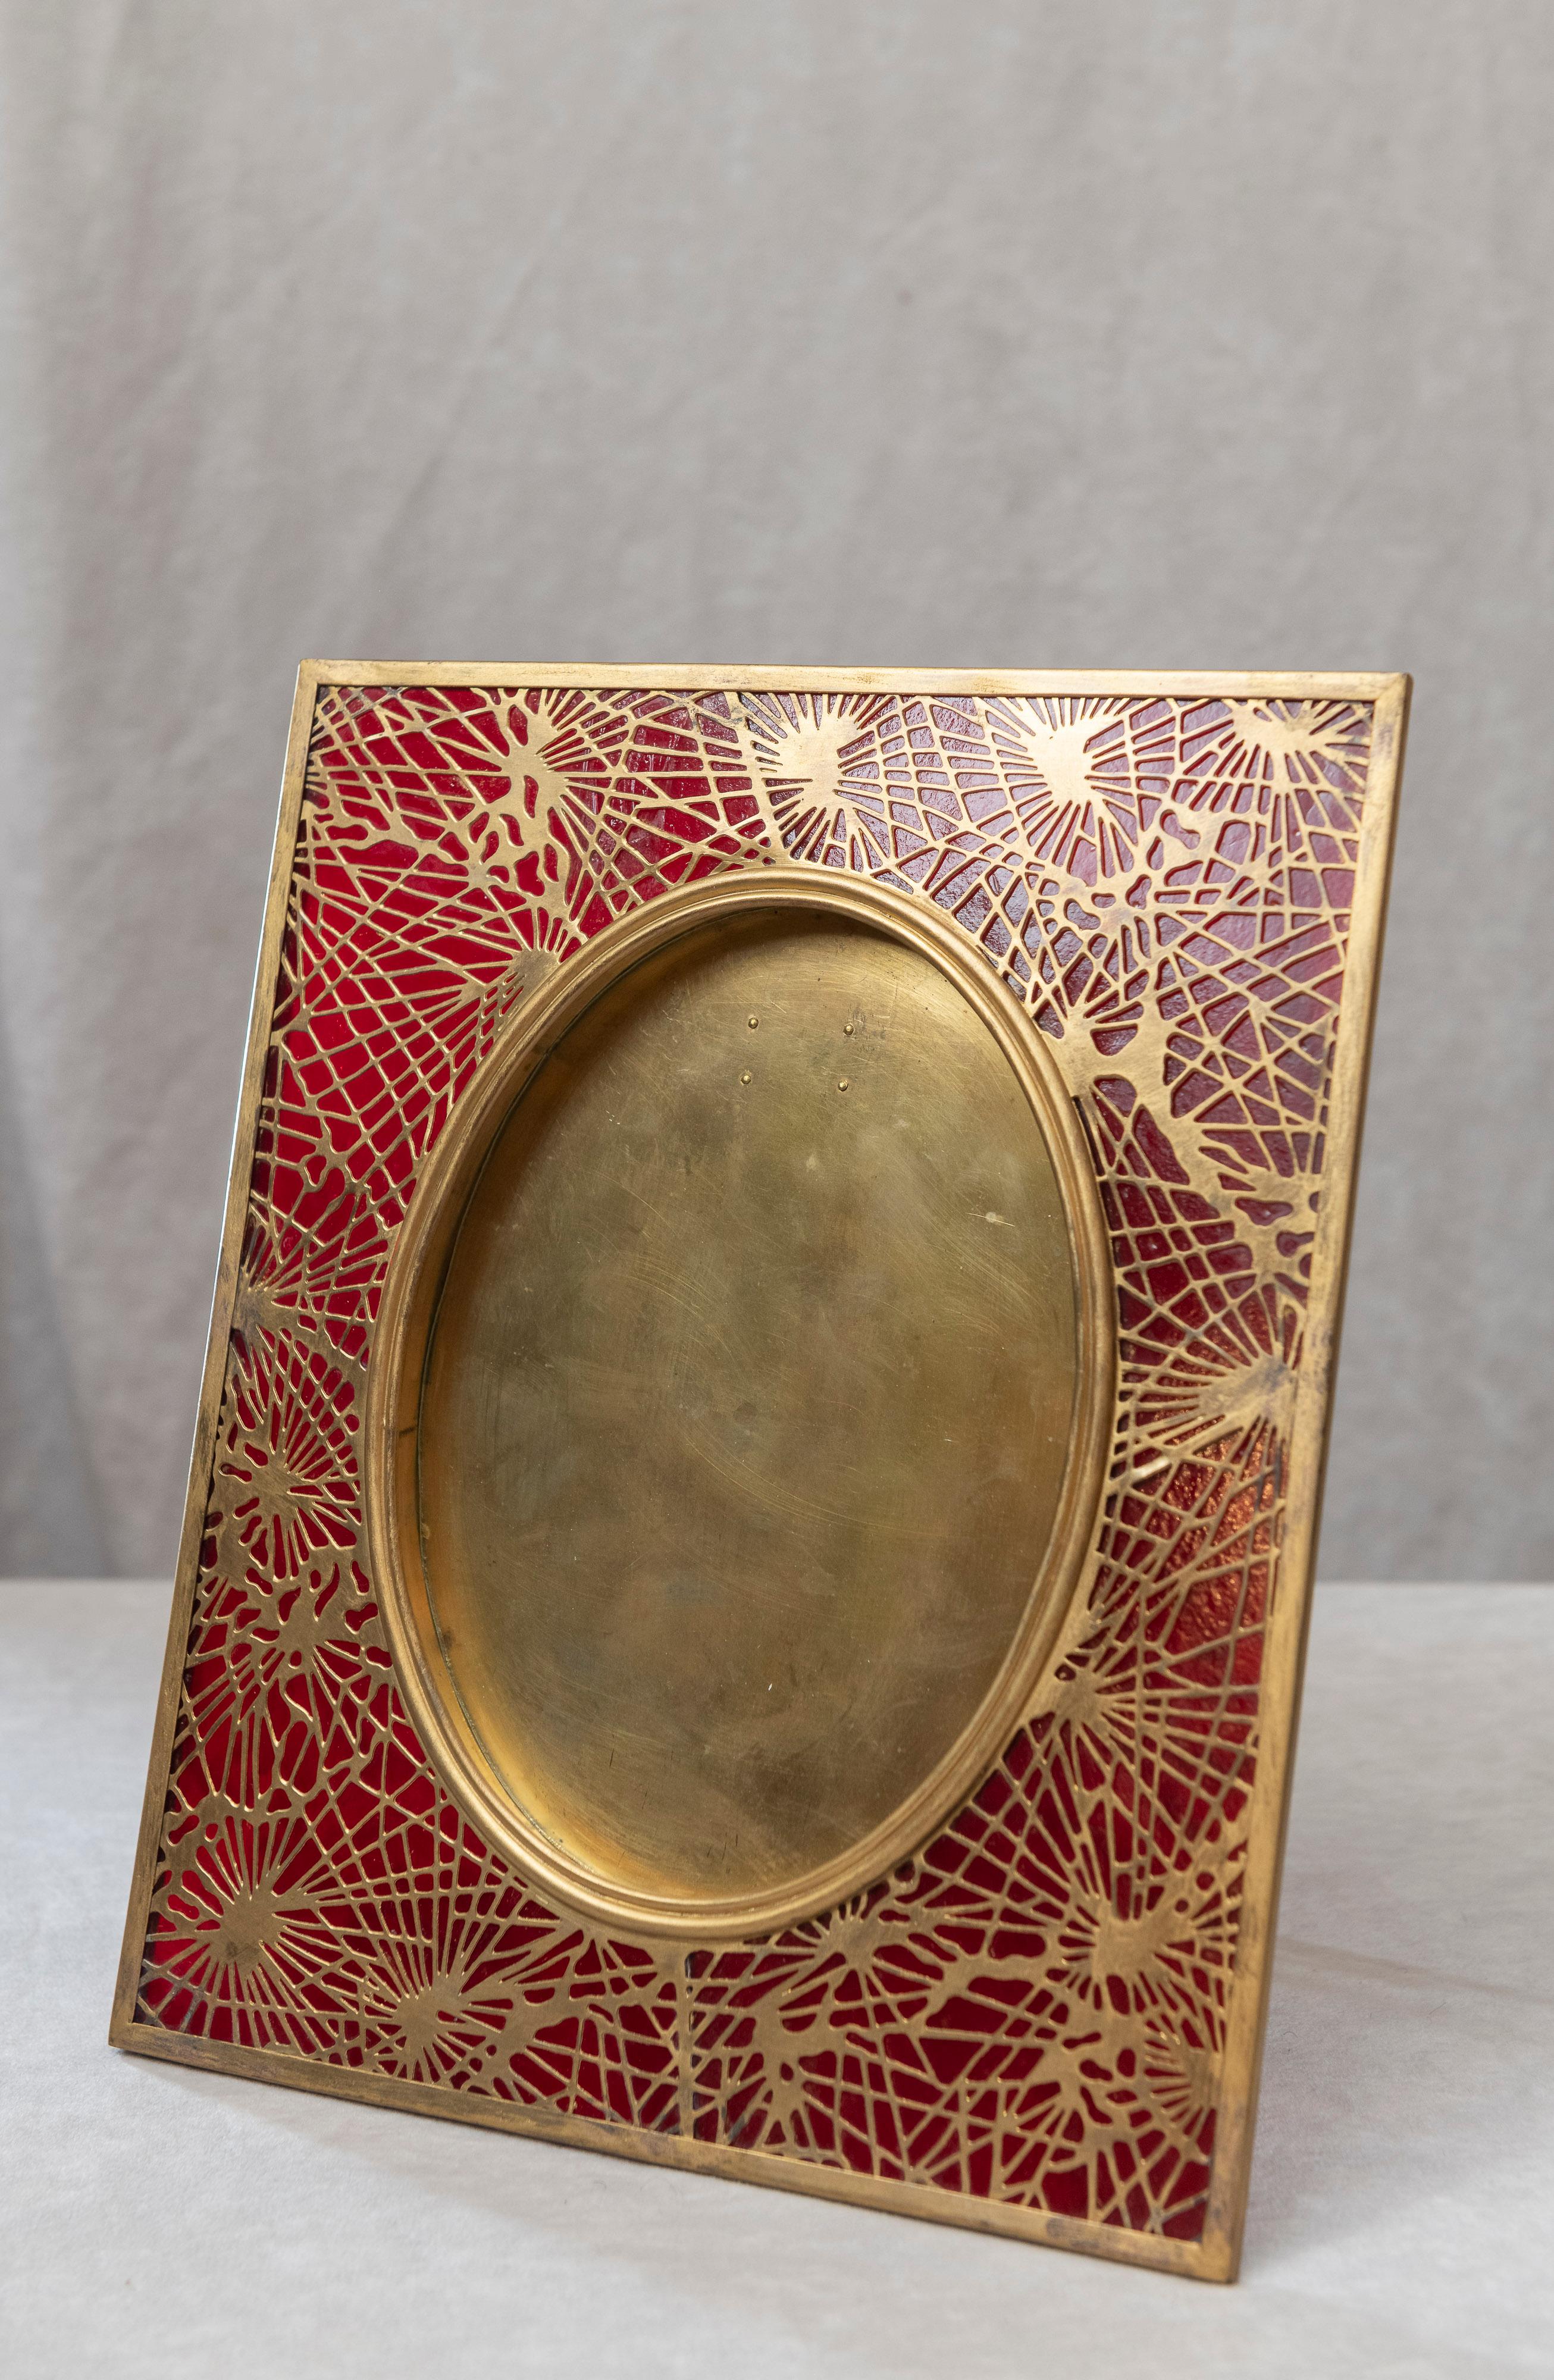 Art Nouveau Tiffany Studios Pine Needle Picture Frame, Red Glass, and Gilt Metal, Signed